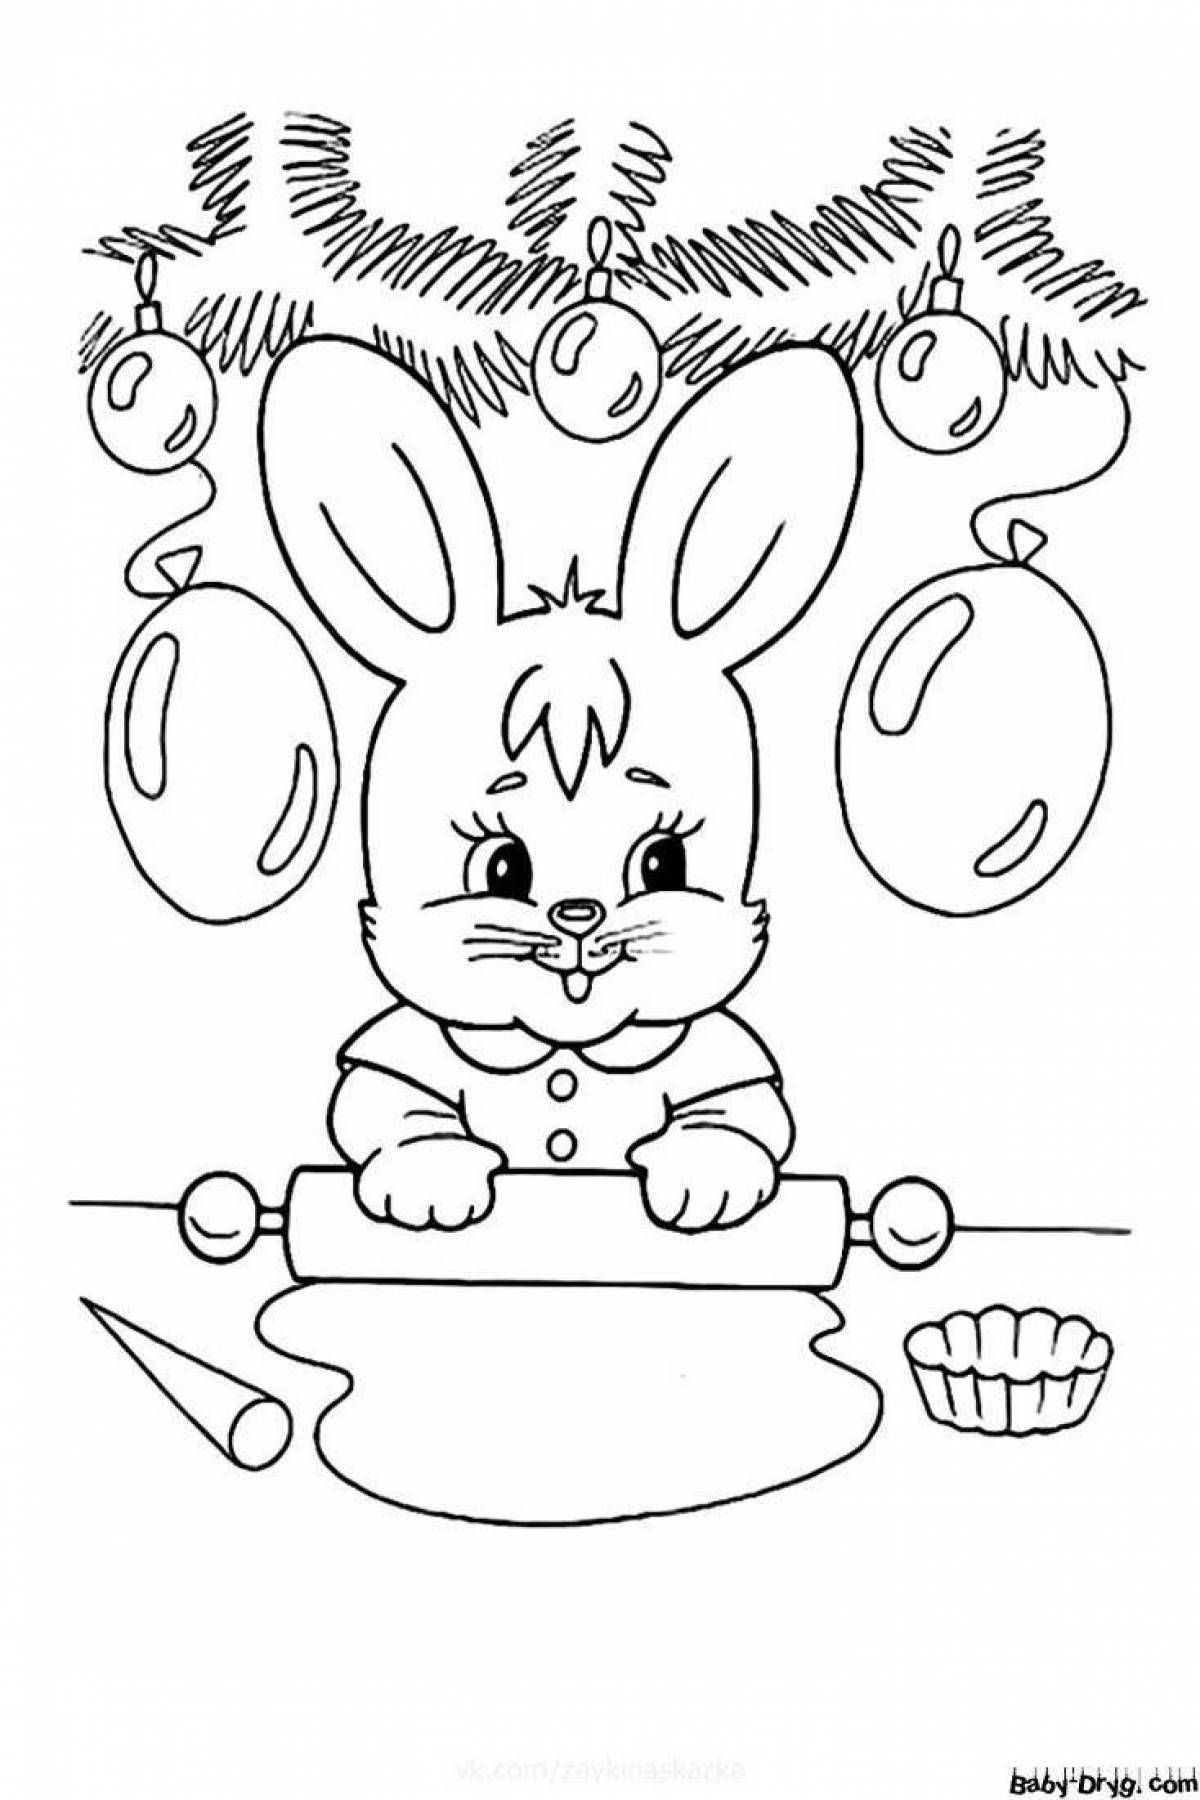 Glamor coloring bunny new year